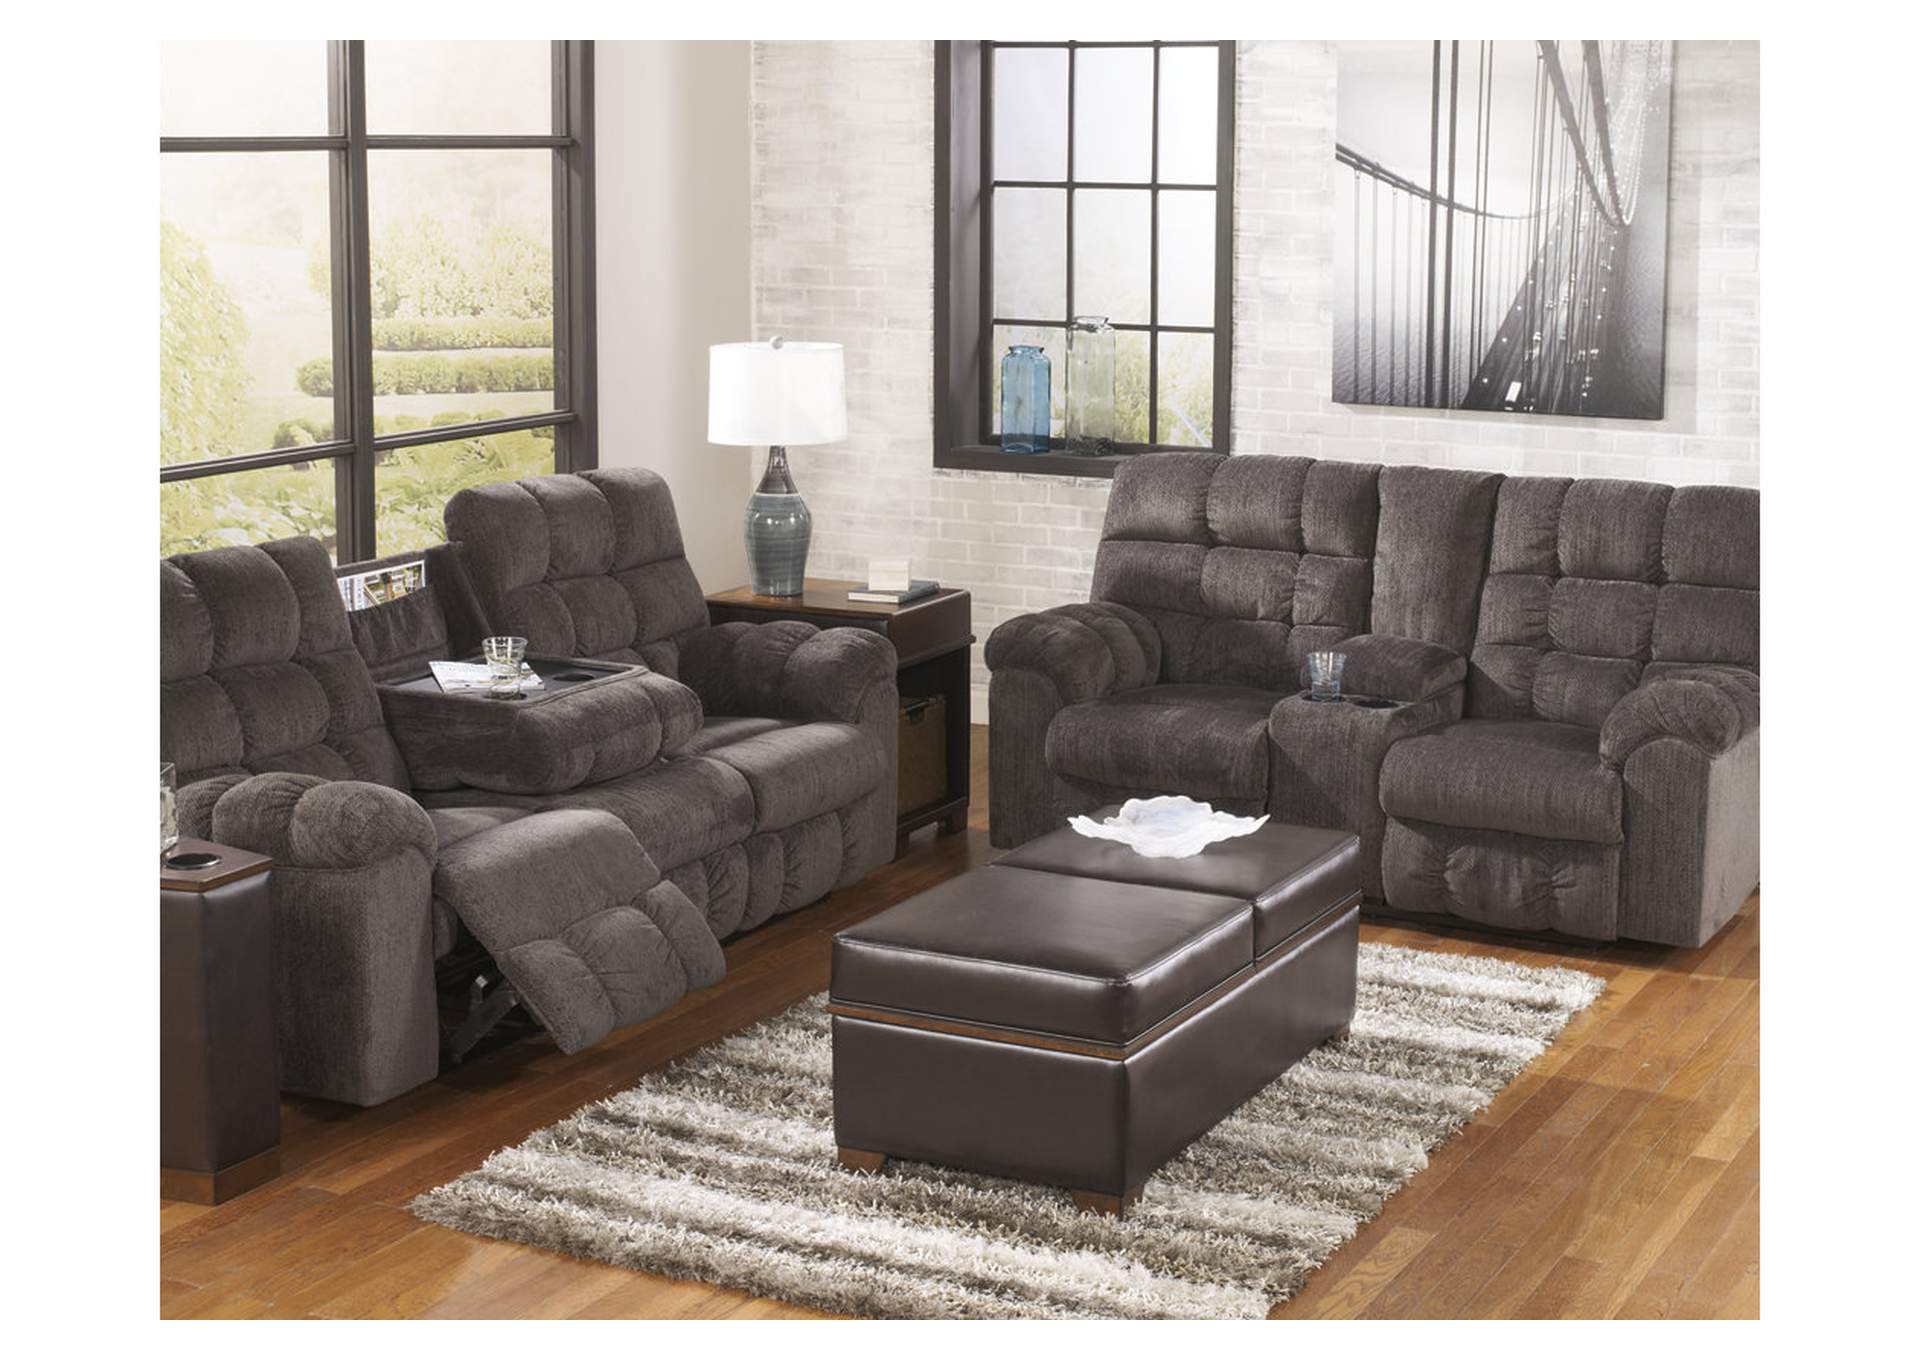 Acieona Sofa, Loveseat and Recliner,Signature Design By Ashley